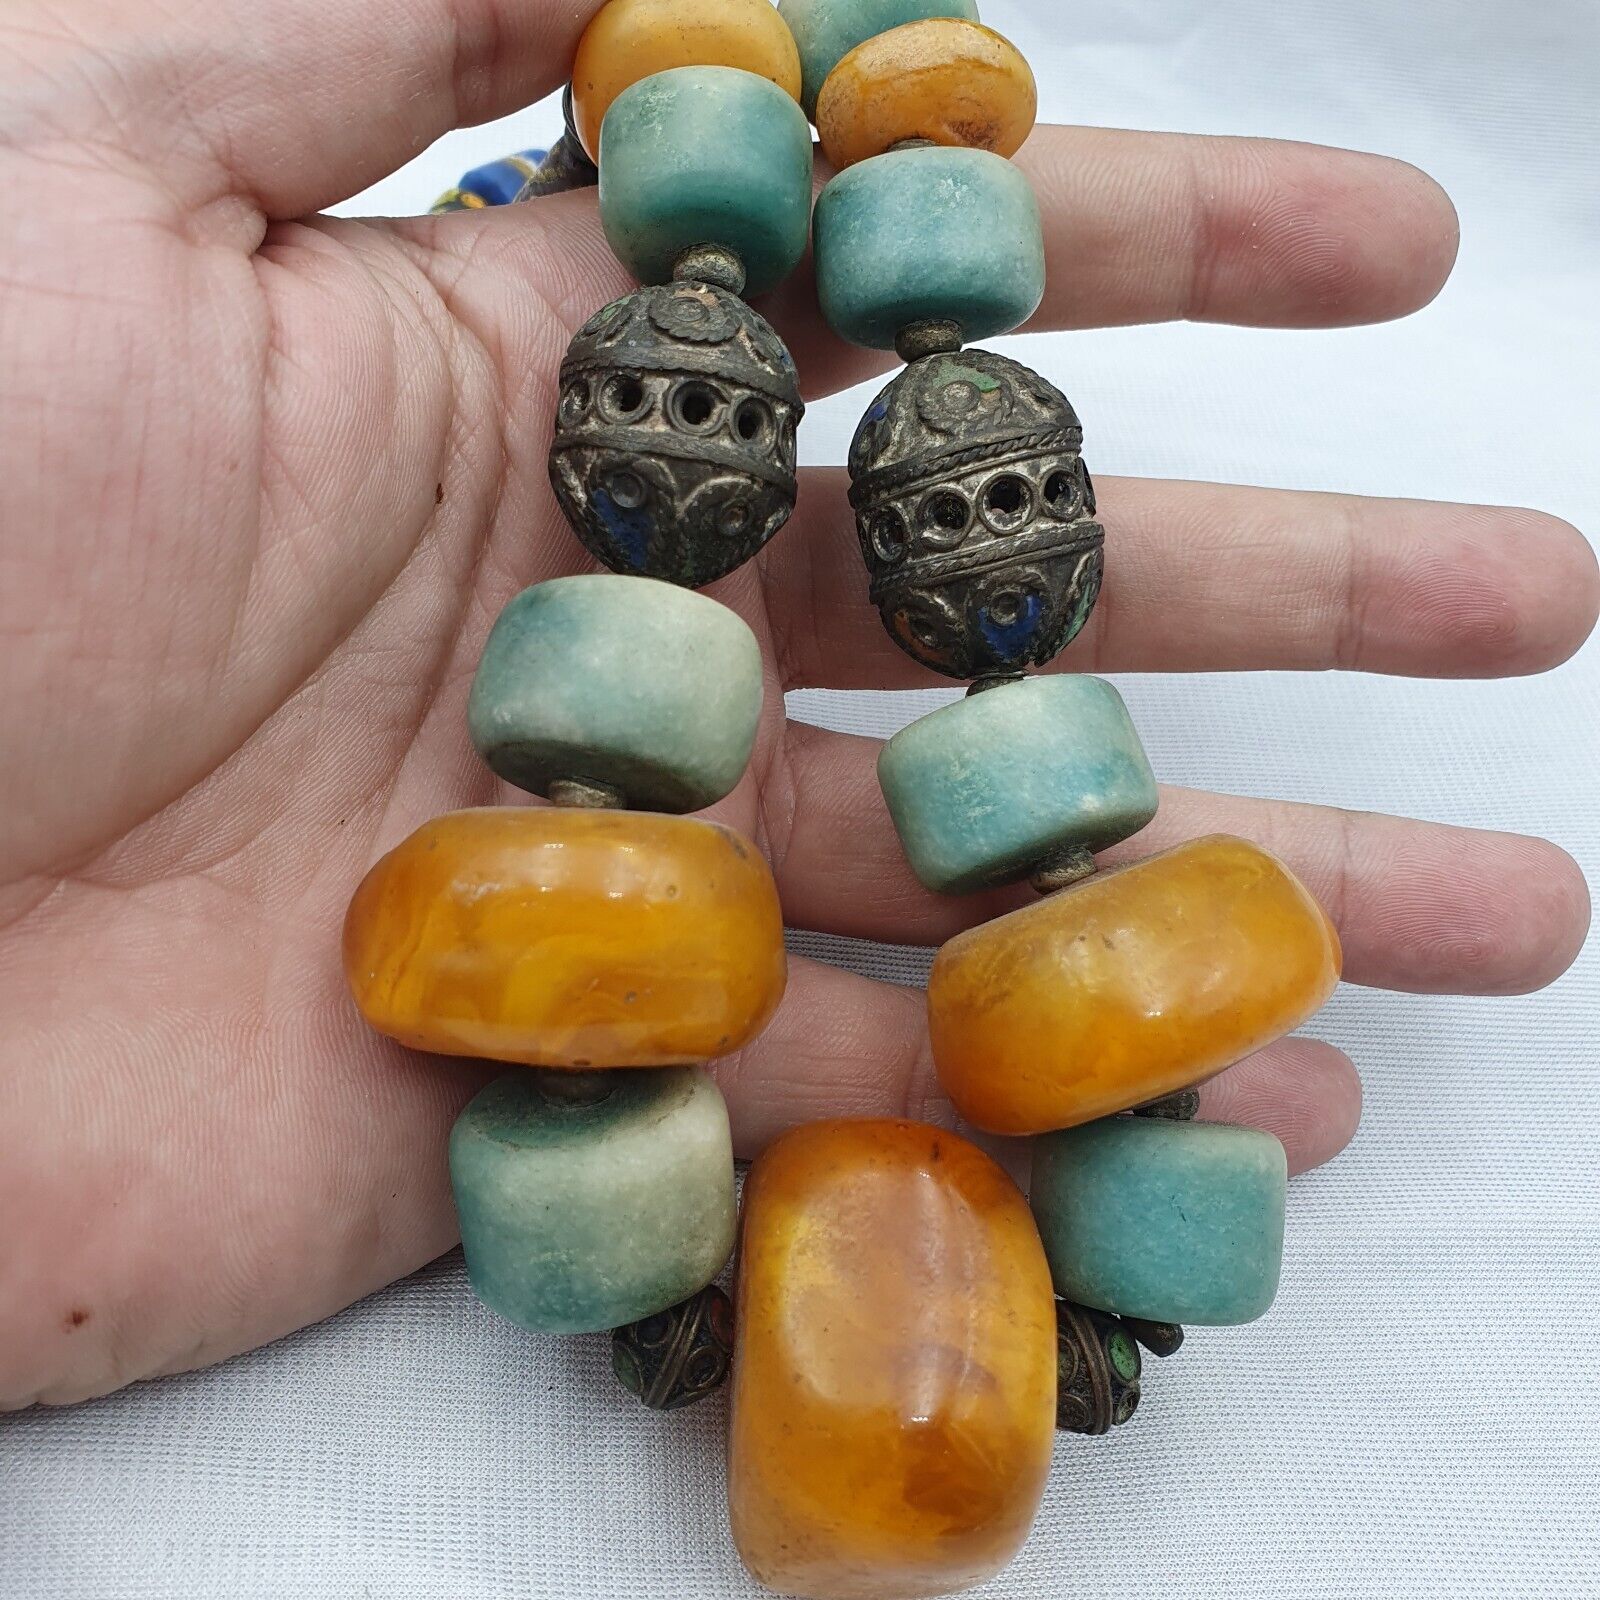 Moroccan Necklace Handcrafted Amber Vintage Jewelry African amazonite Necklace